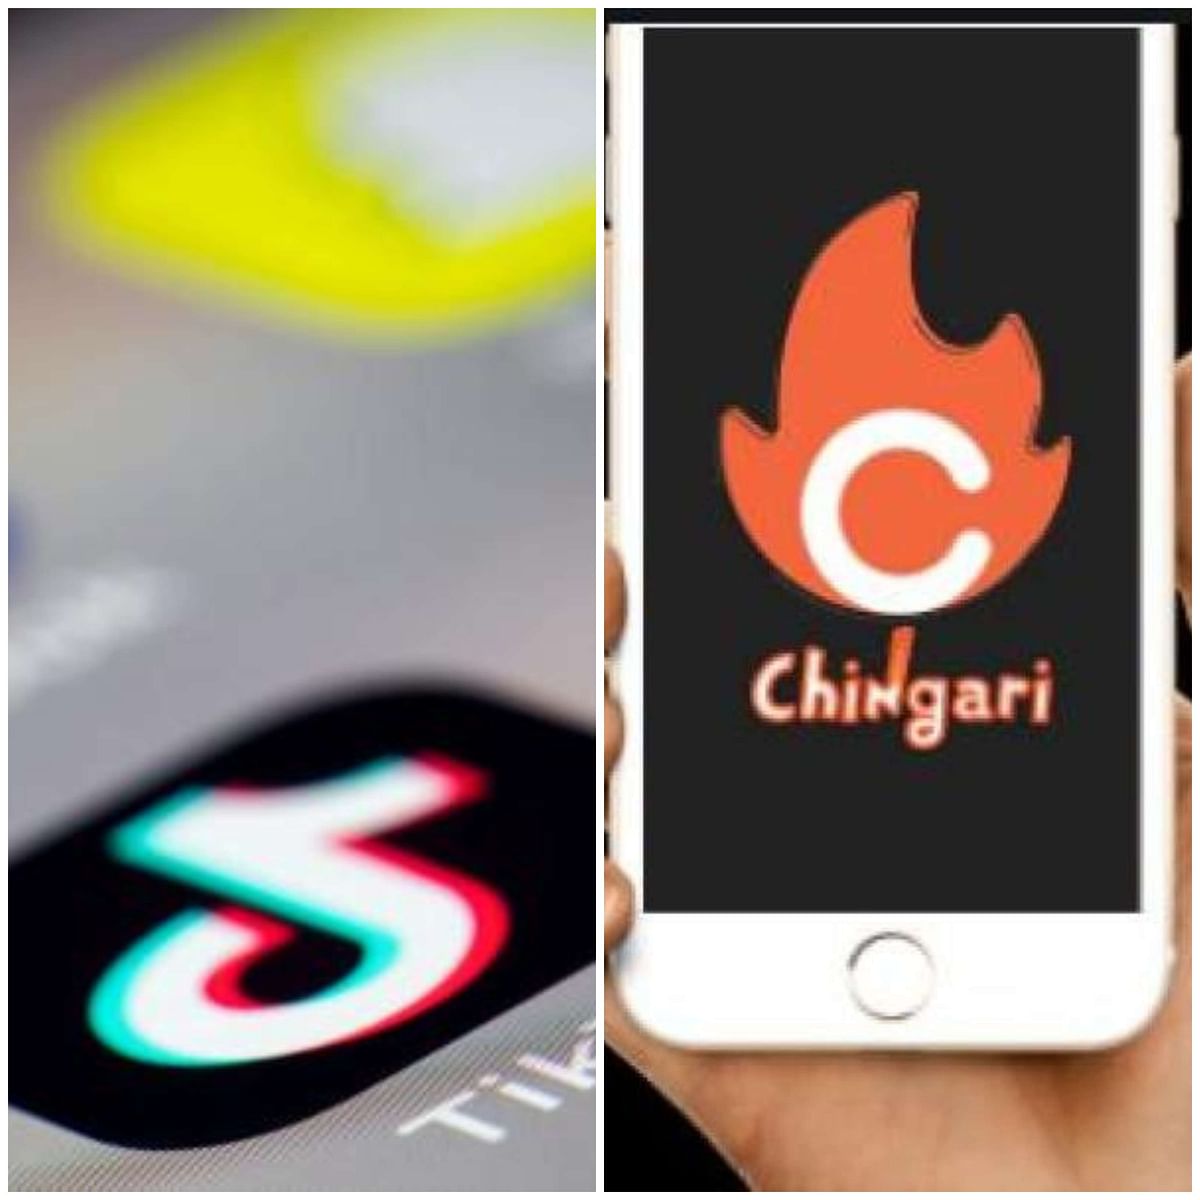 TikTok, Helo, Likee, Kwai and Bigo Live | They are similar in nature and offer short-video sharing feature. The best alternative for these apps are Chingari, Mitron, Roposo, and Dubsmash, among others. Credit: AFP Photo